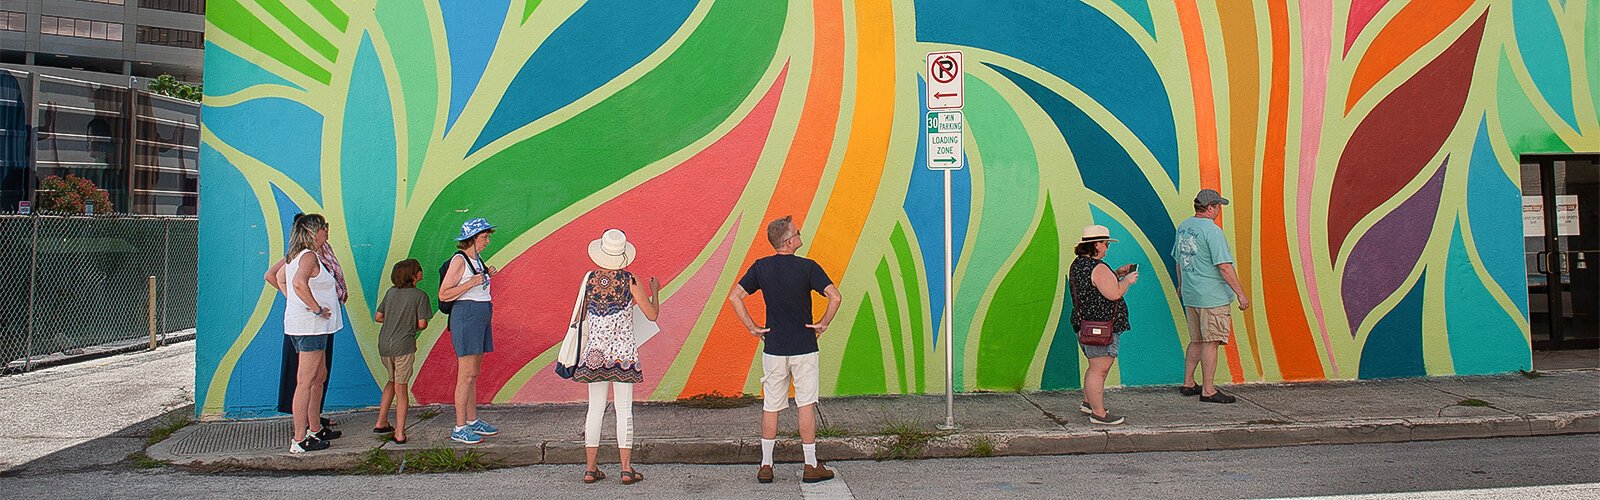  A colorful leafy looking wall mural by artist Cecilia Lueza titled “Elysian Days" is part of the public art walk.